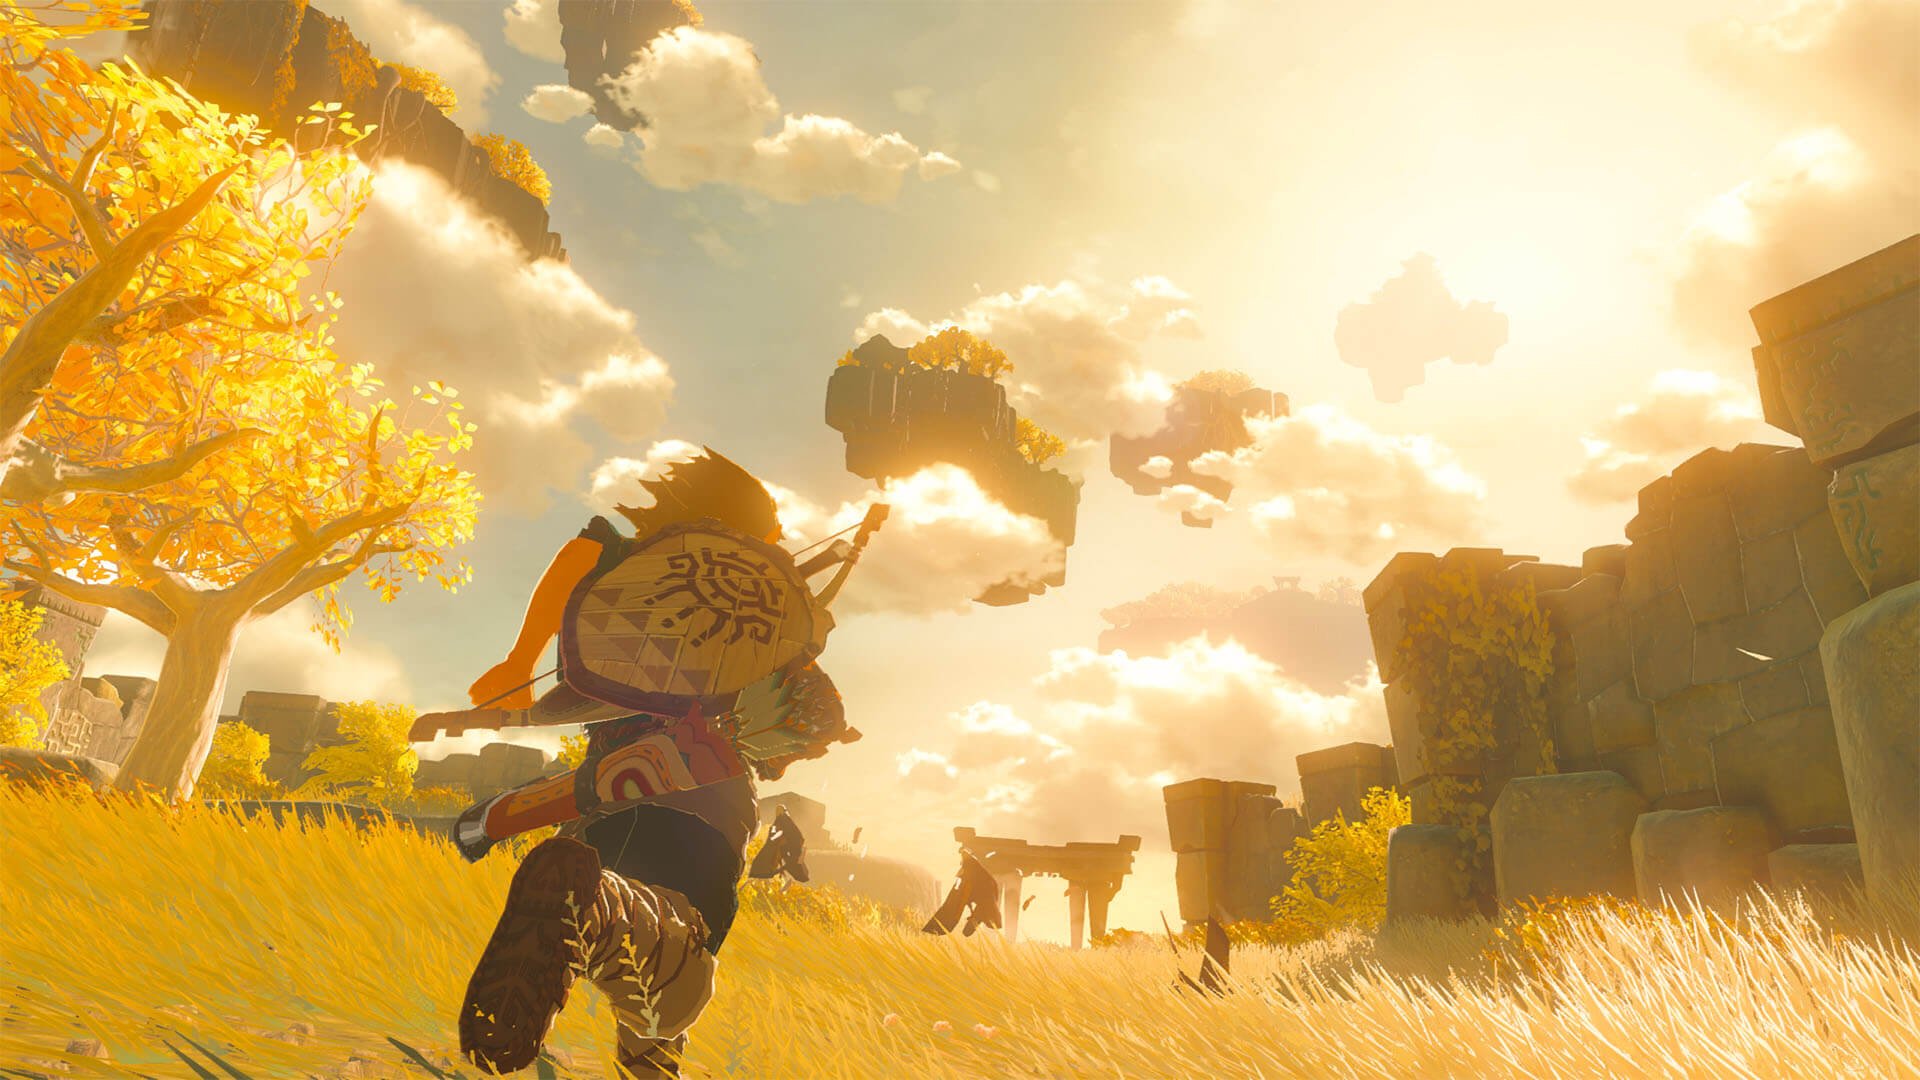 The Breath of the Wild sequel being worked on by Nintendo